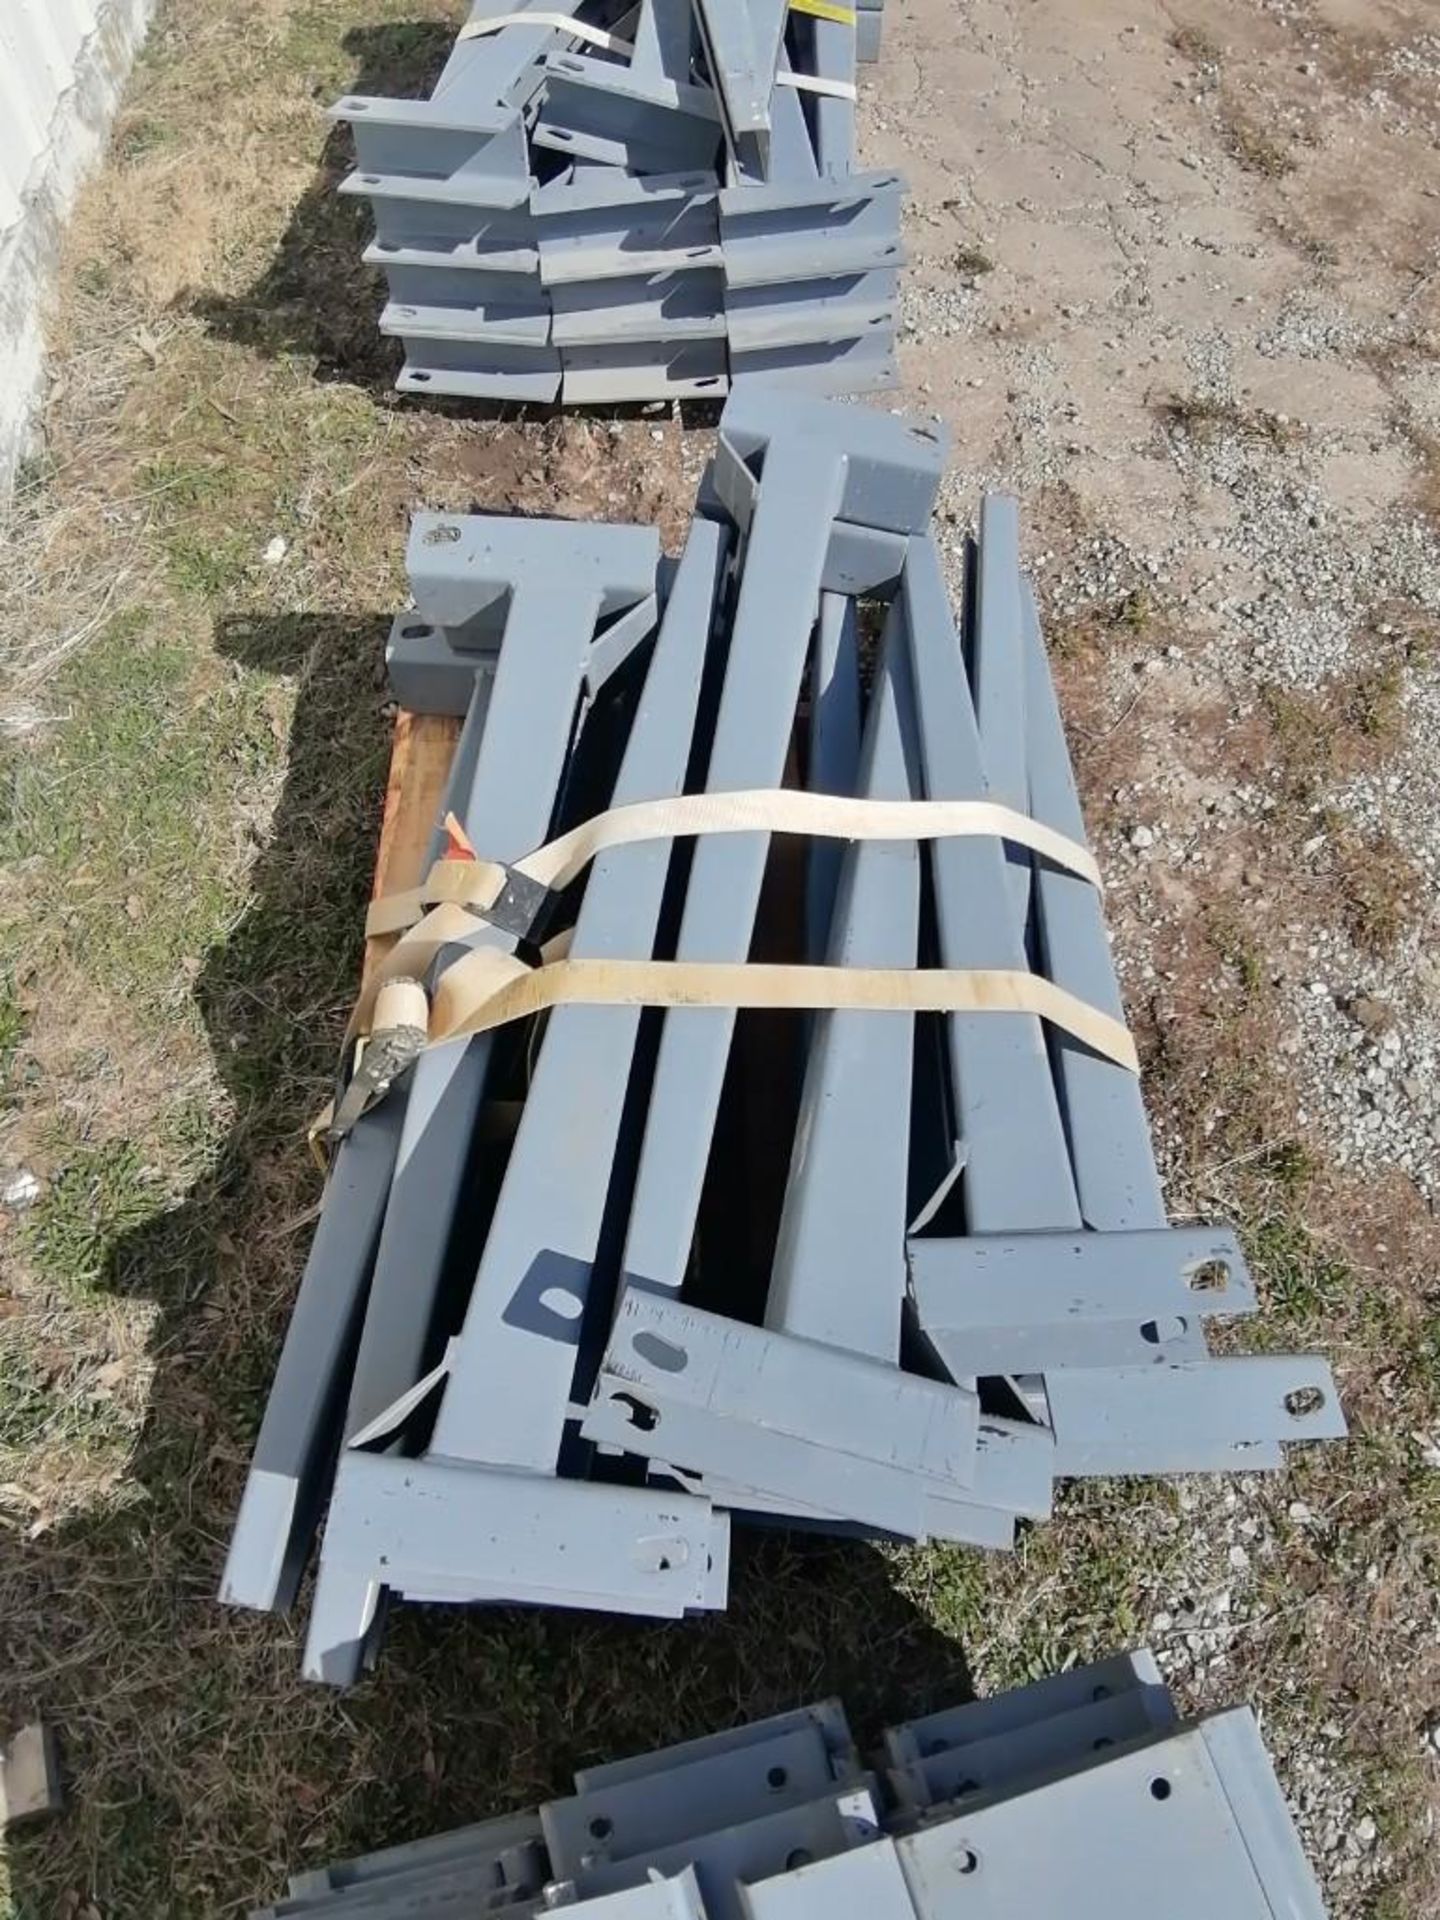 (20) 15' x 9 1/2" x 4" Upright Cantilever Rack, (40) 5' 1" Legs, (50) 4' Arms & (3) Buckets of - Image 16 of 26